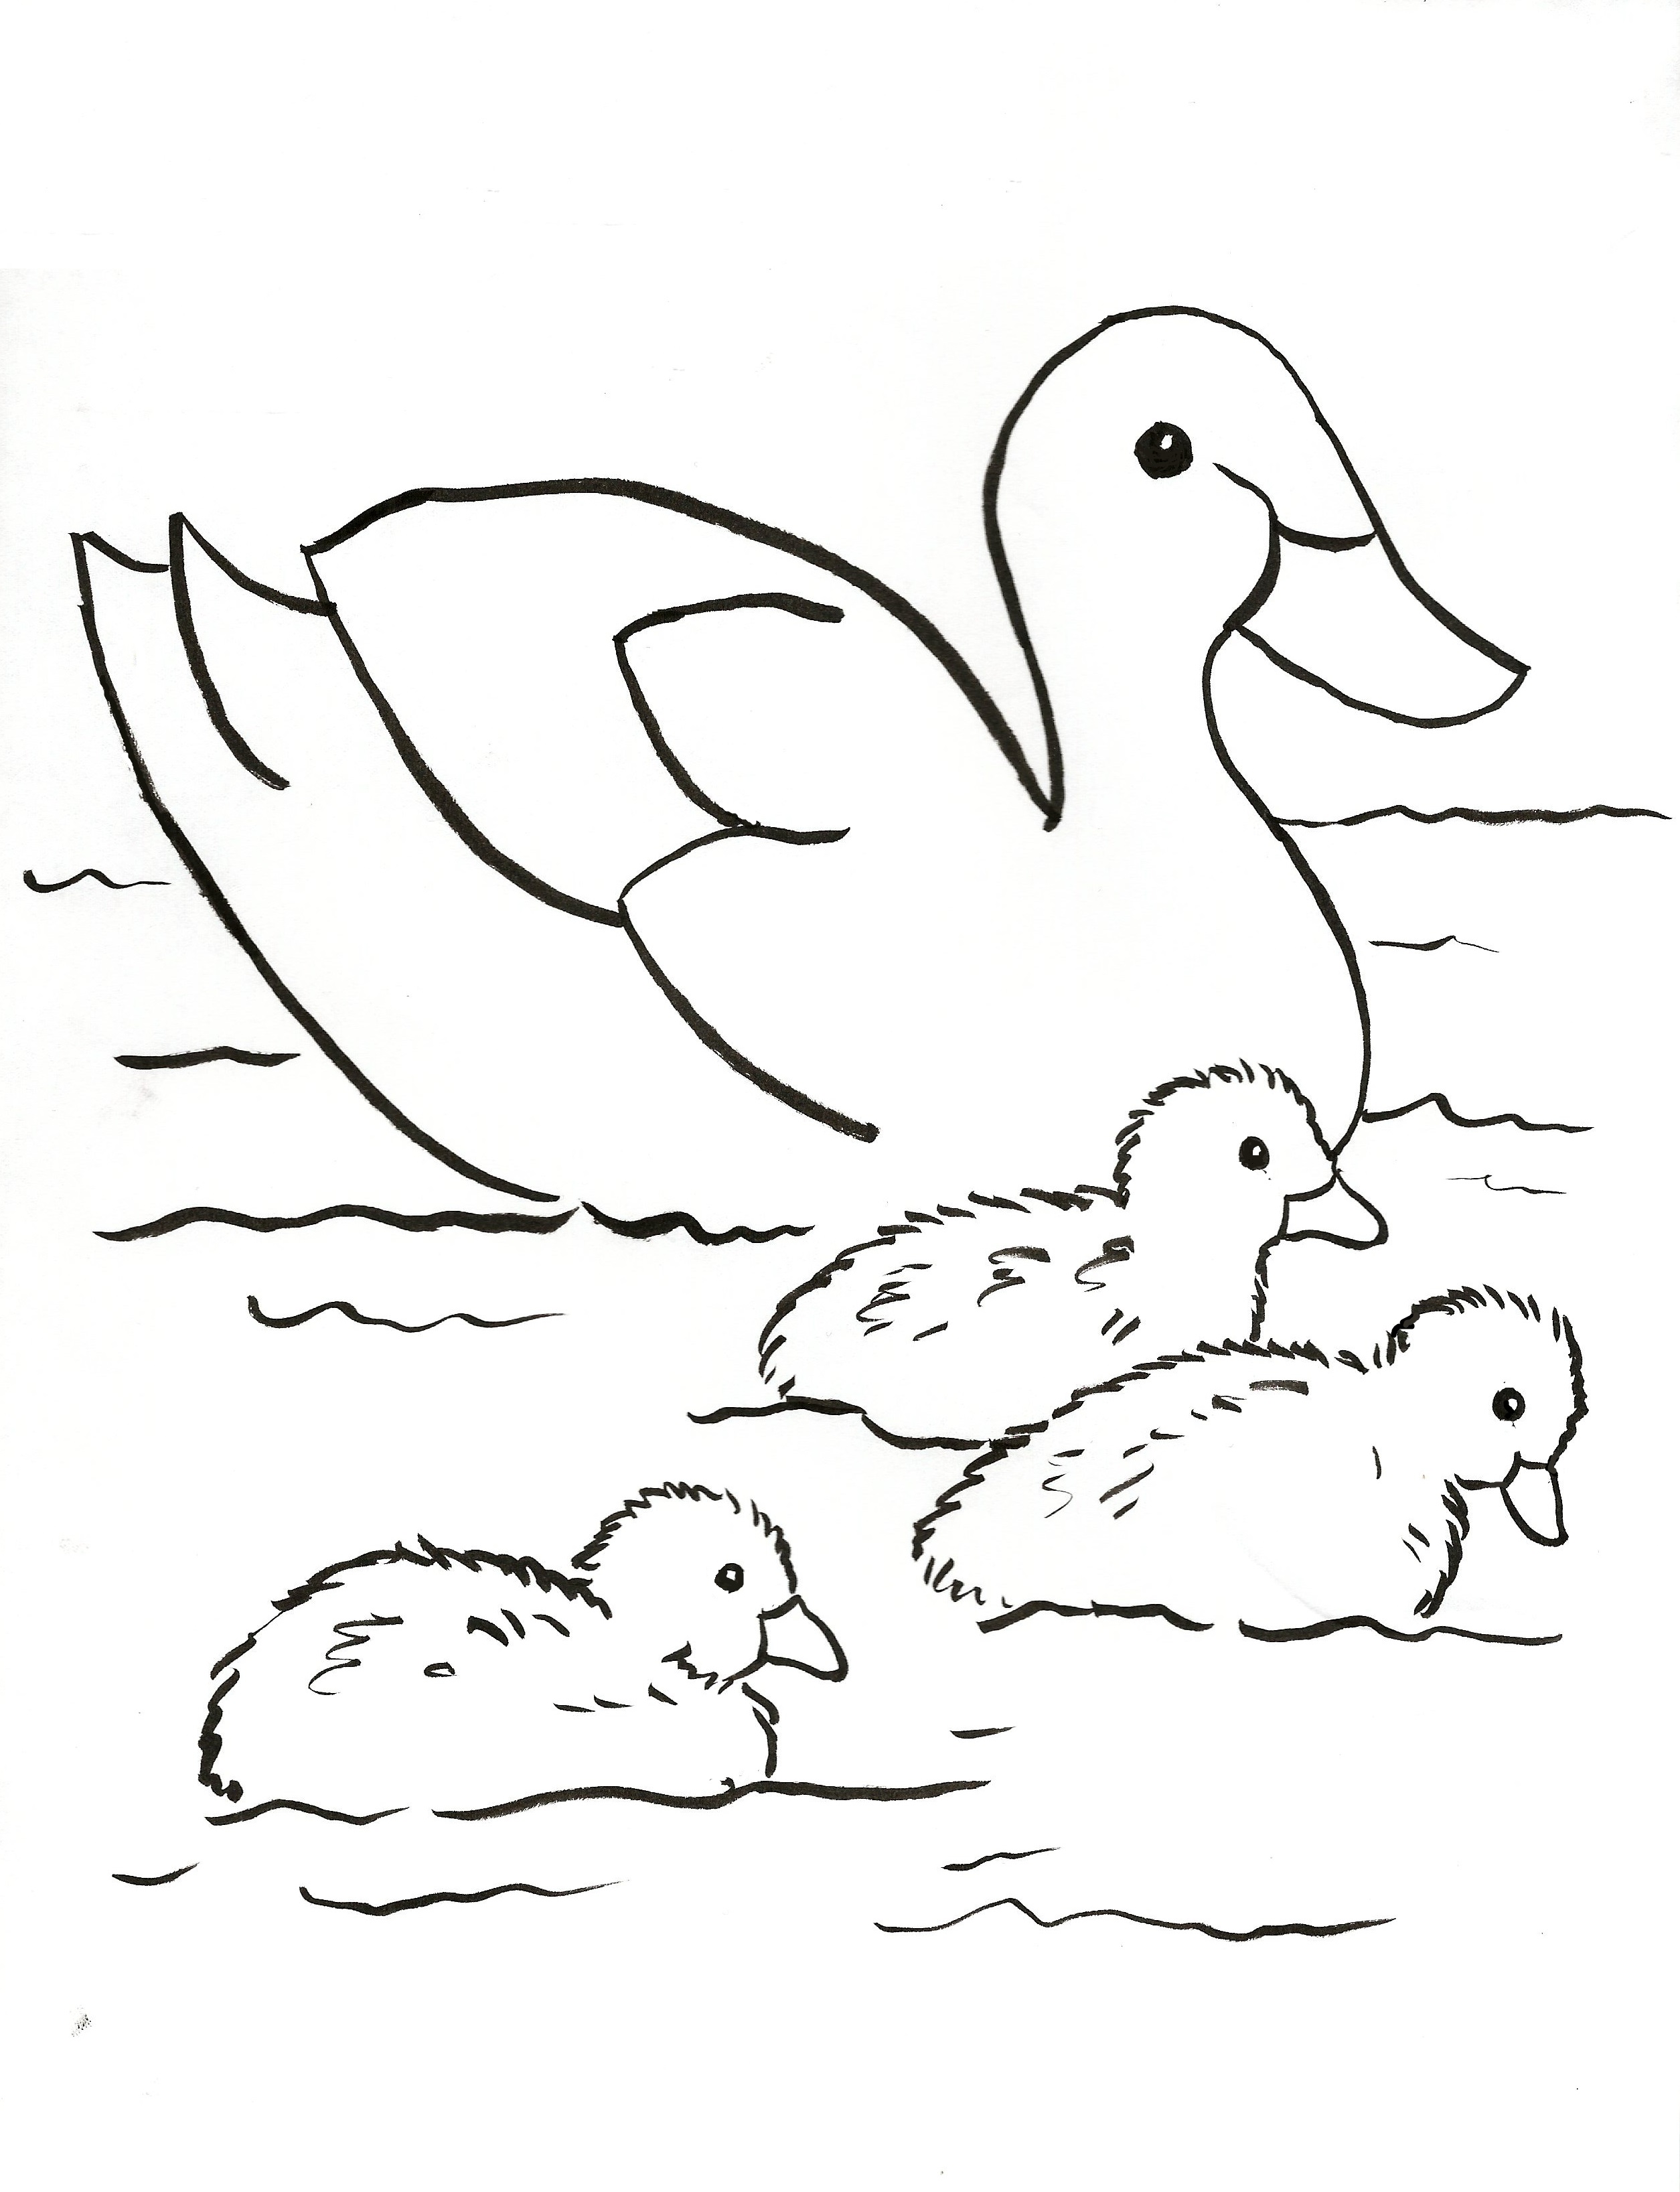 duck-family-coloring-page-samantha-bell